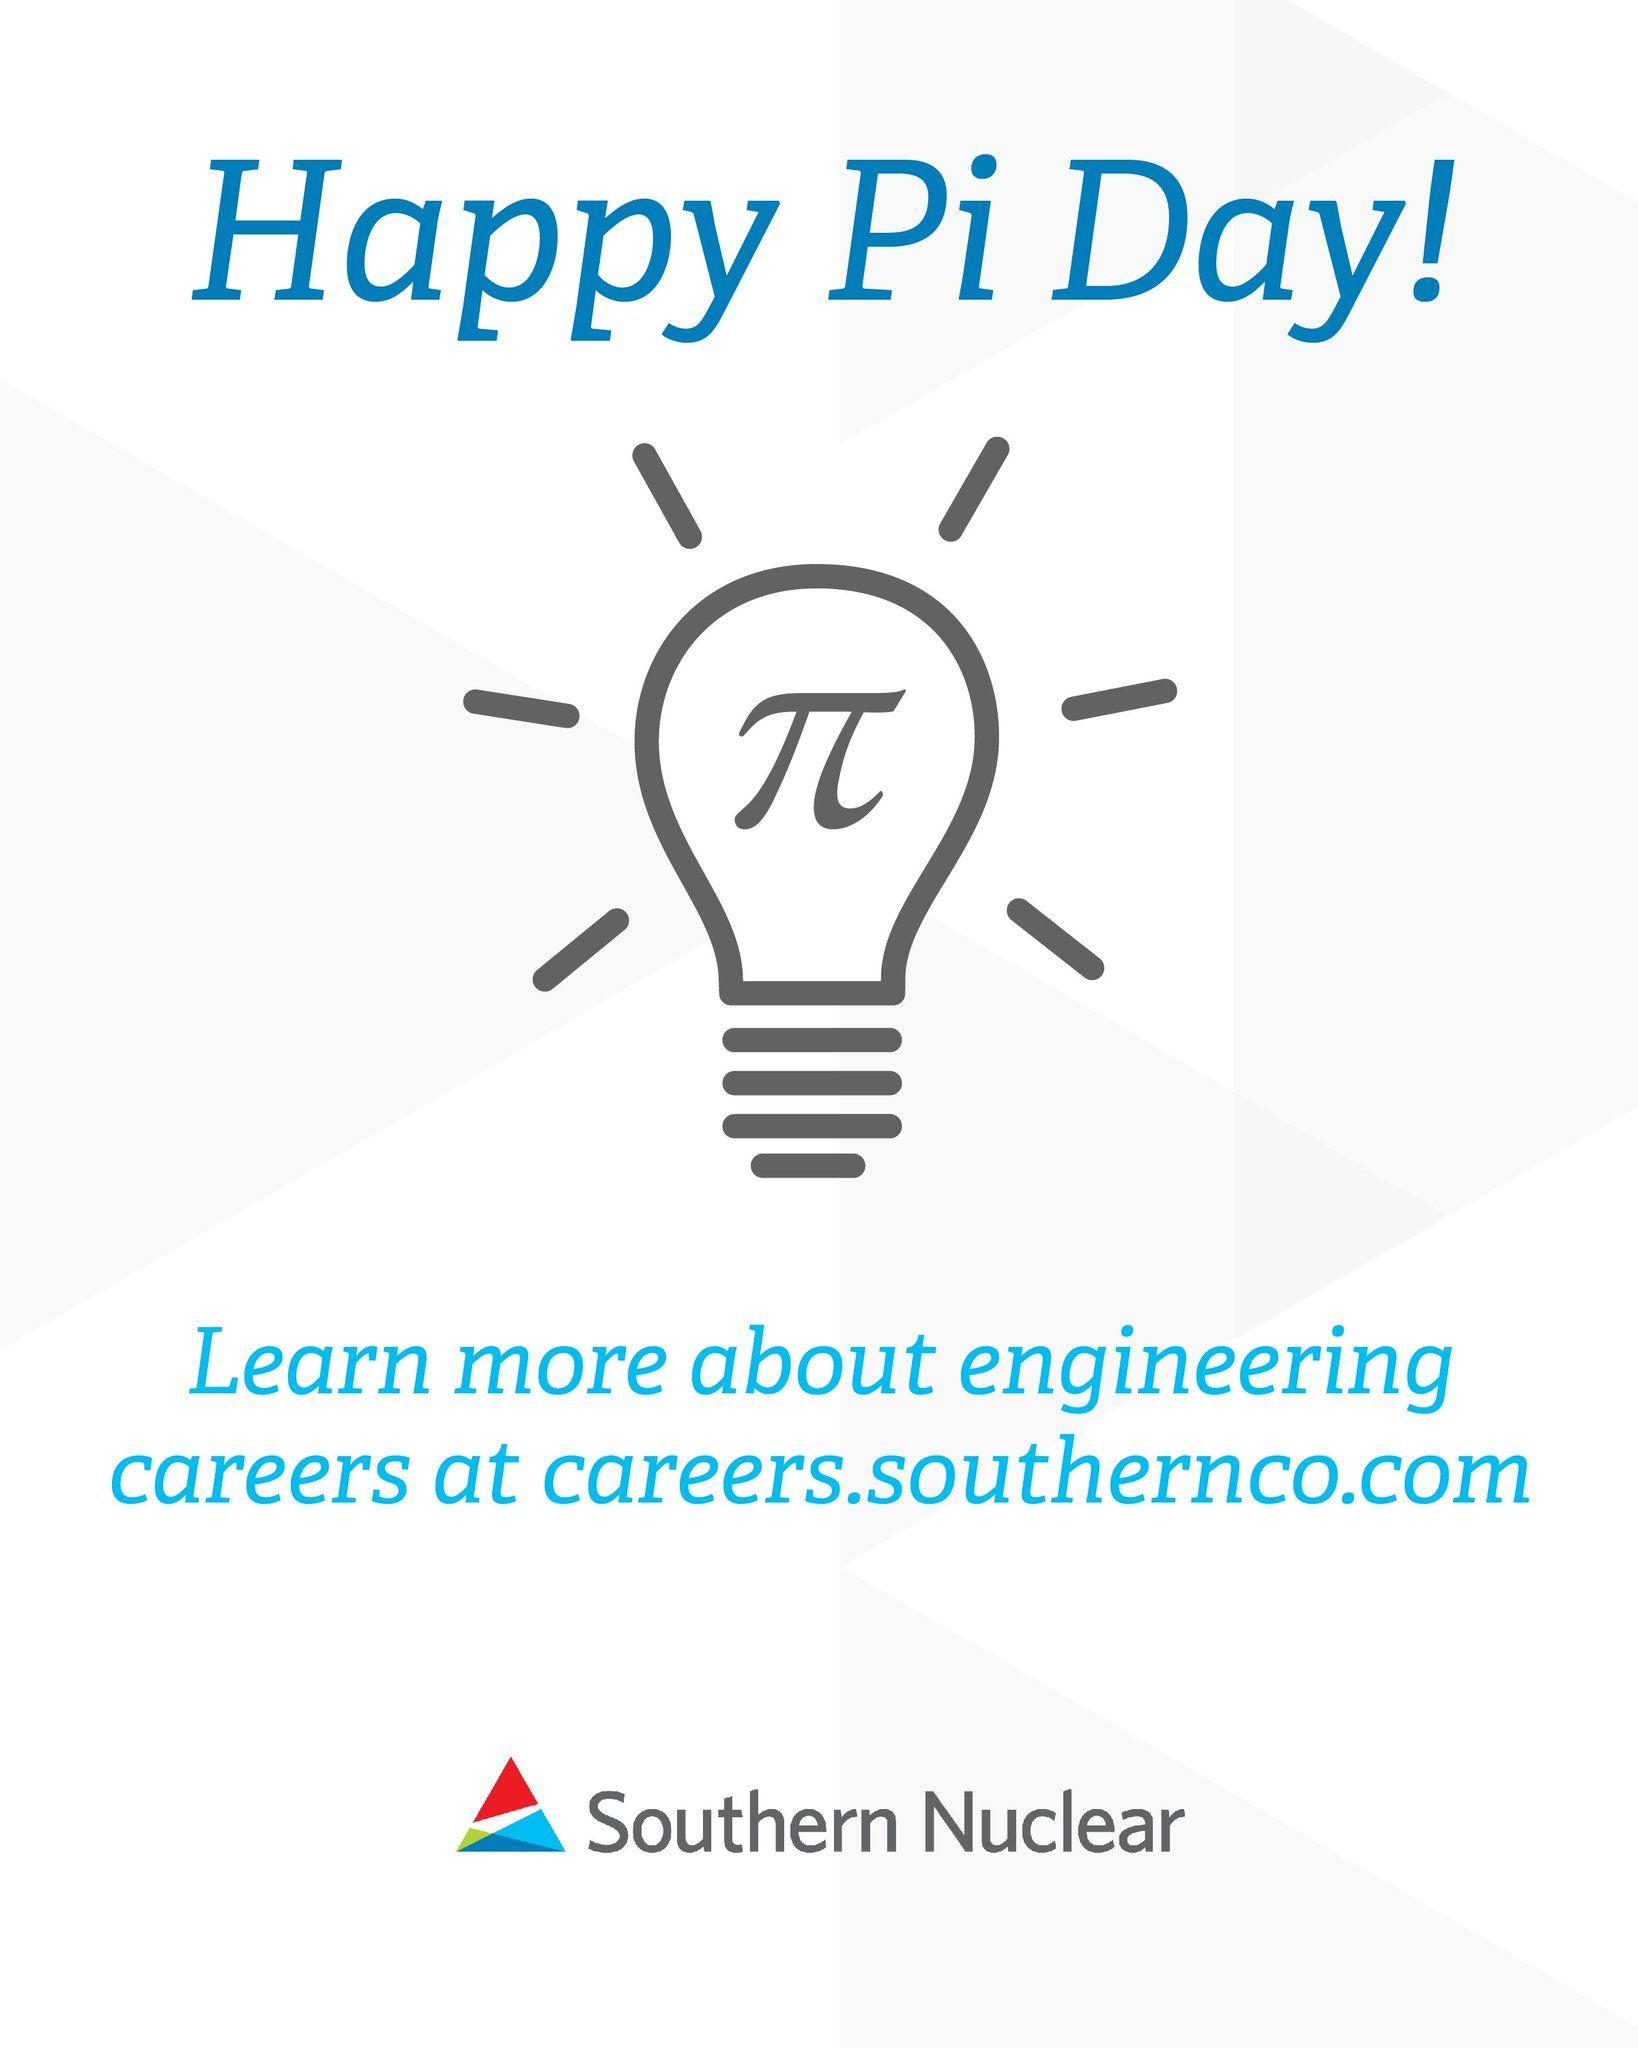 Southern Nuclear Logo - Southern Nuclear #PiDay! Learn more